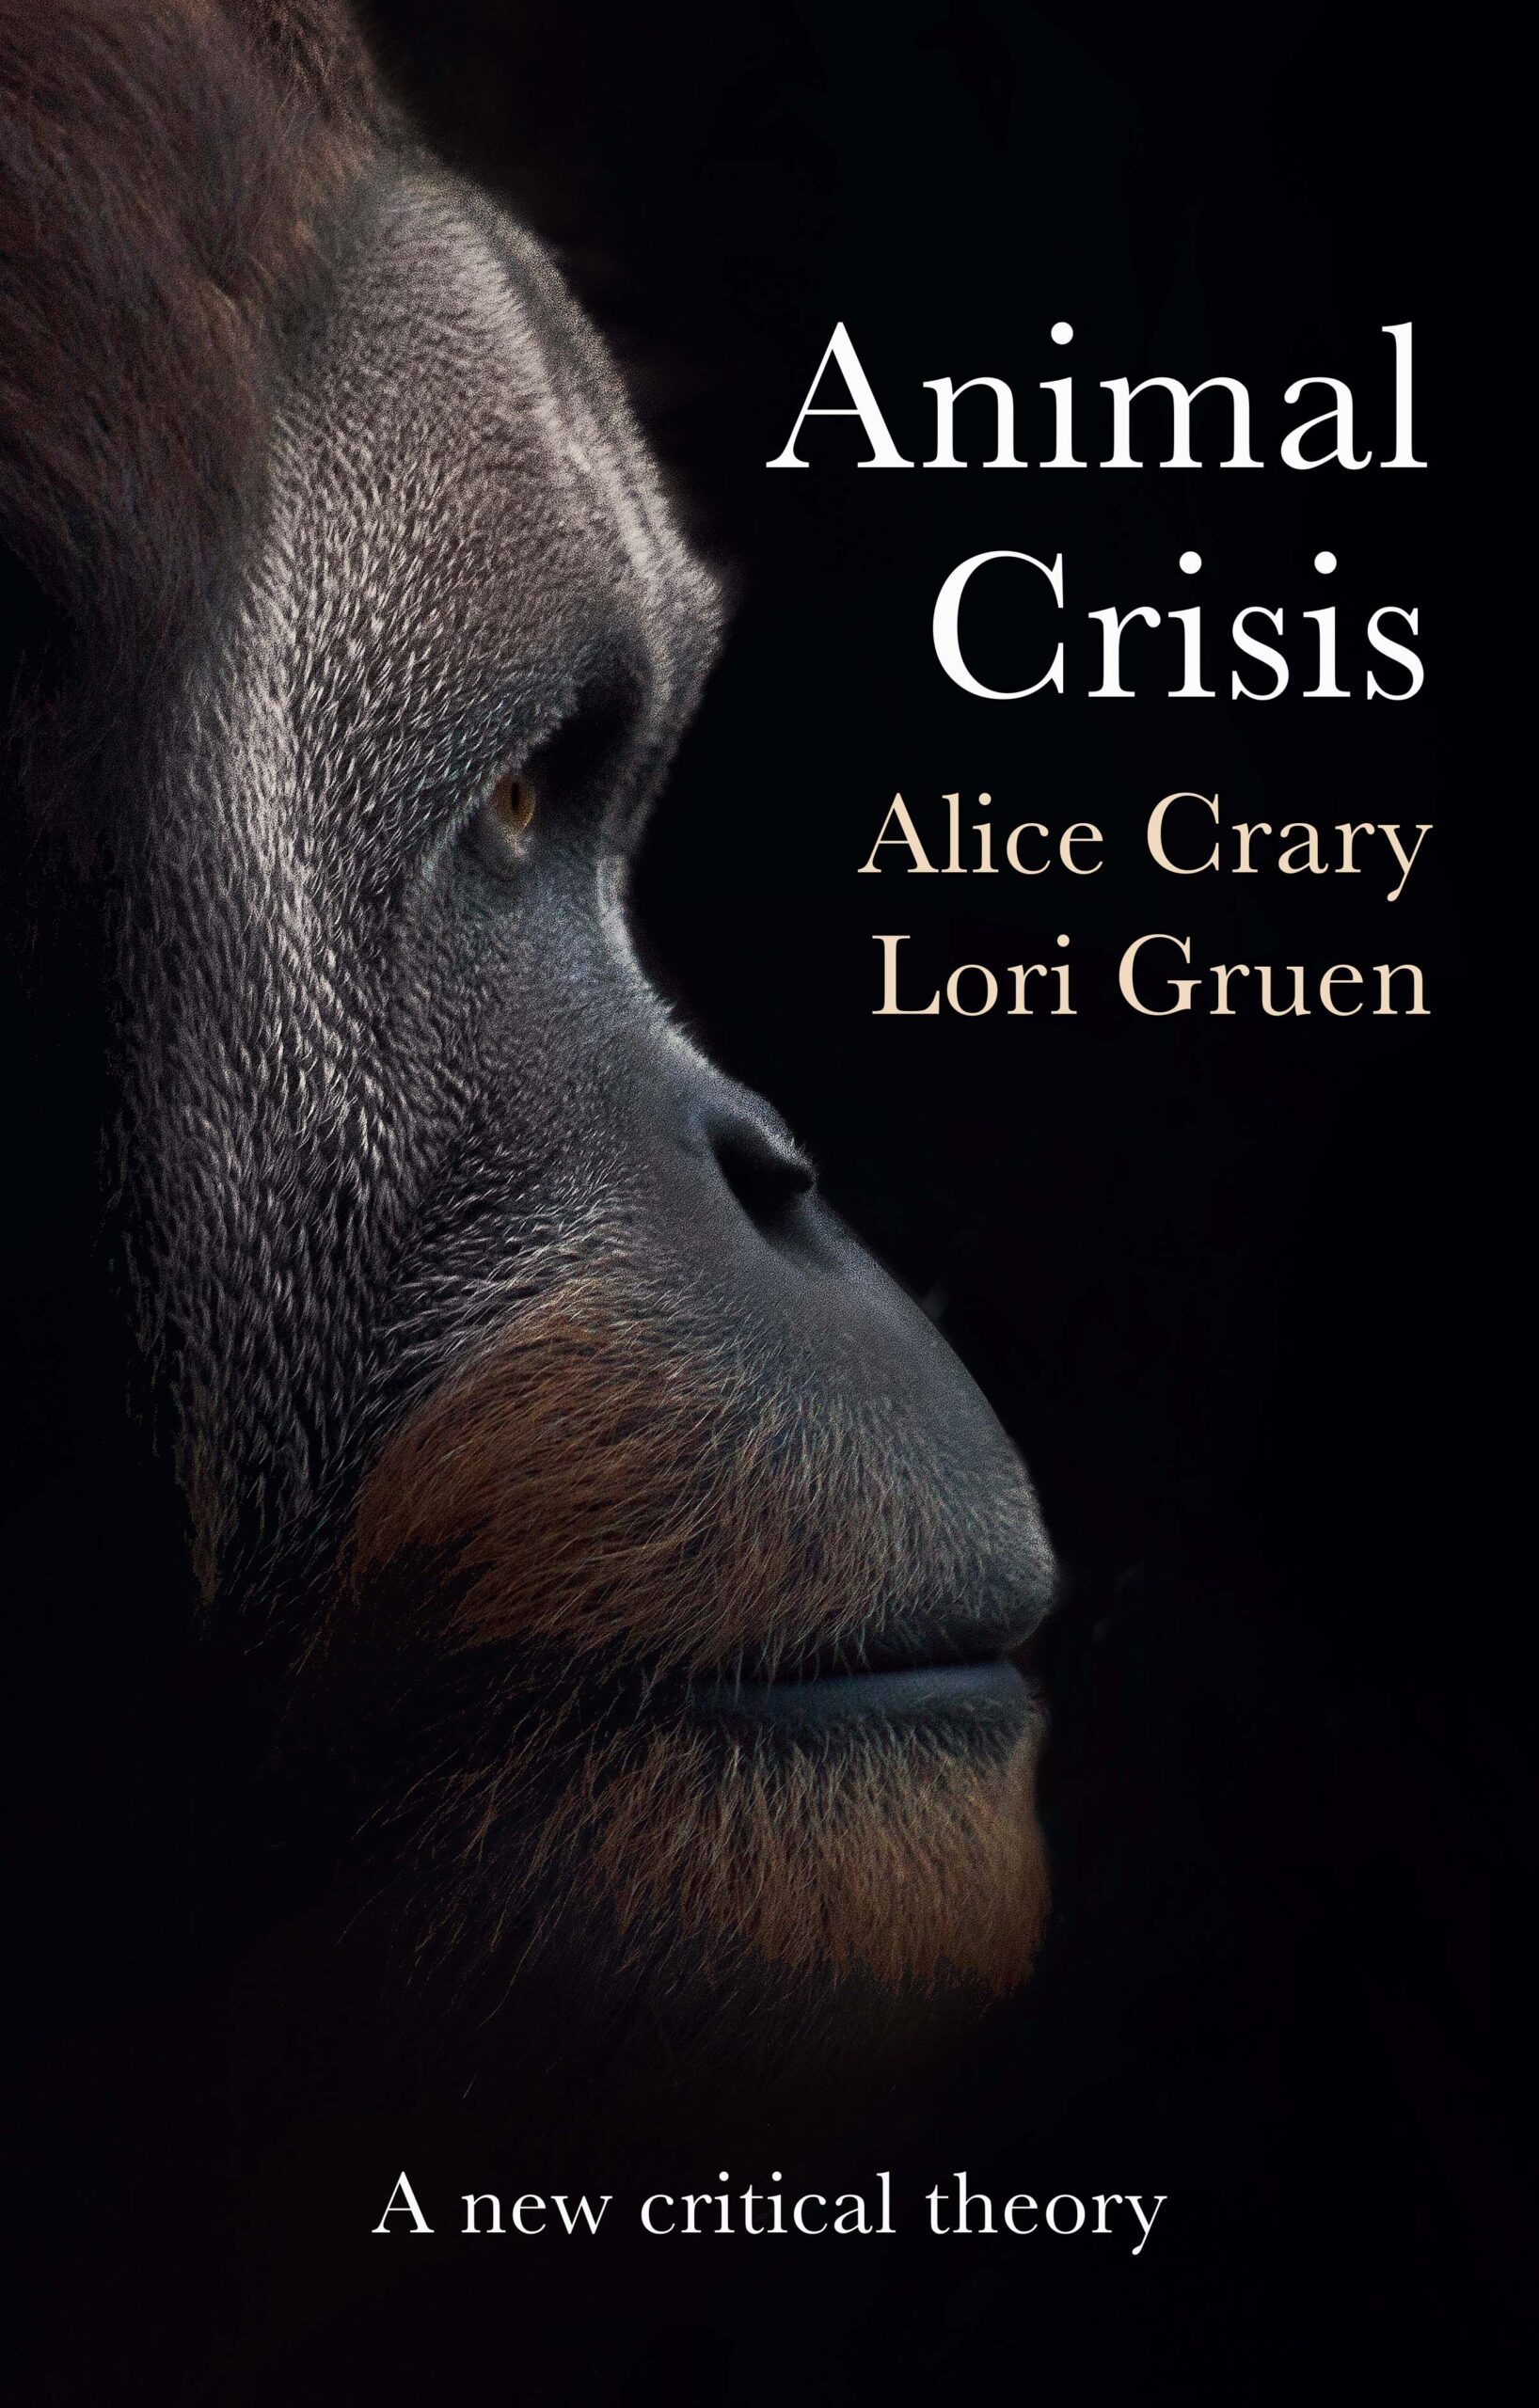 cover of book Animal Crisis by Alice Crary and Lori Gruen